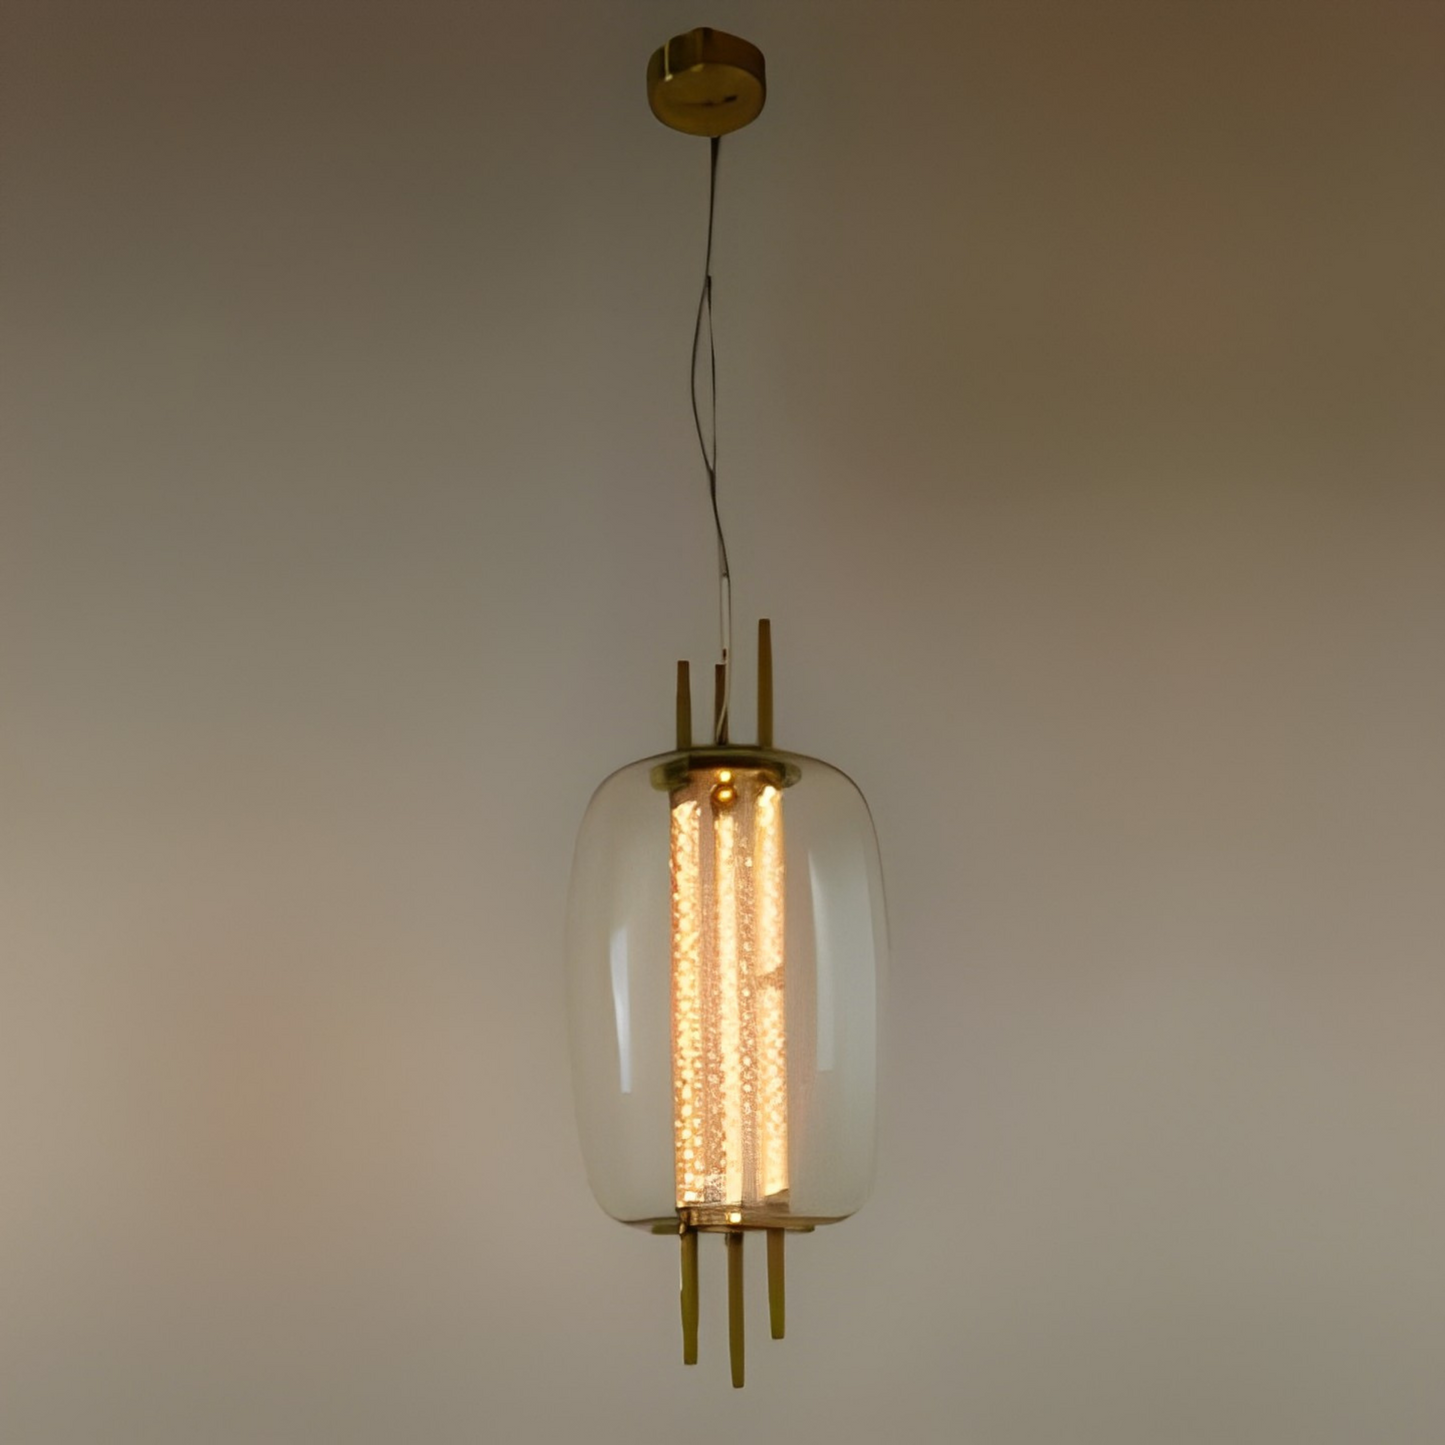 Load image into Gallery viewer, Luxury Modern Iron Panchromatic Glass Twisted LED Pendant by Gloss (A1844/B)
